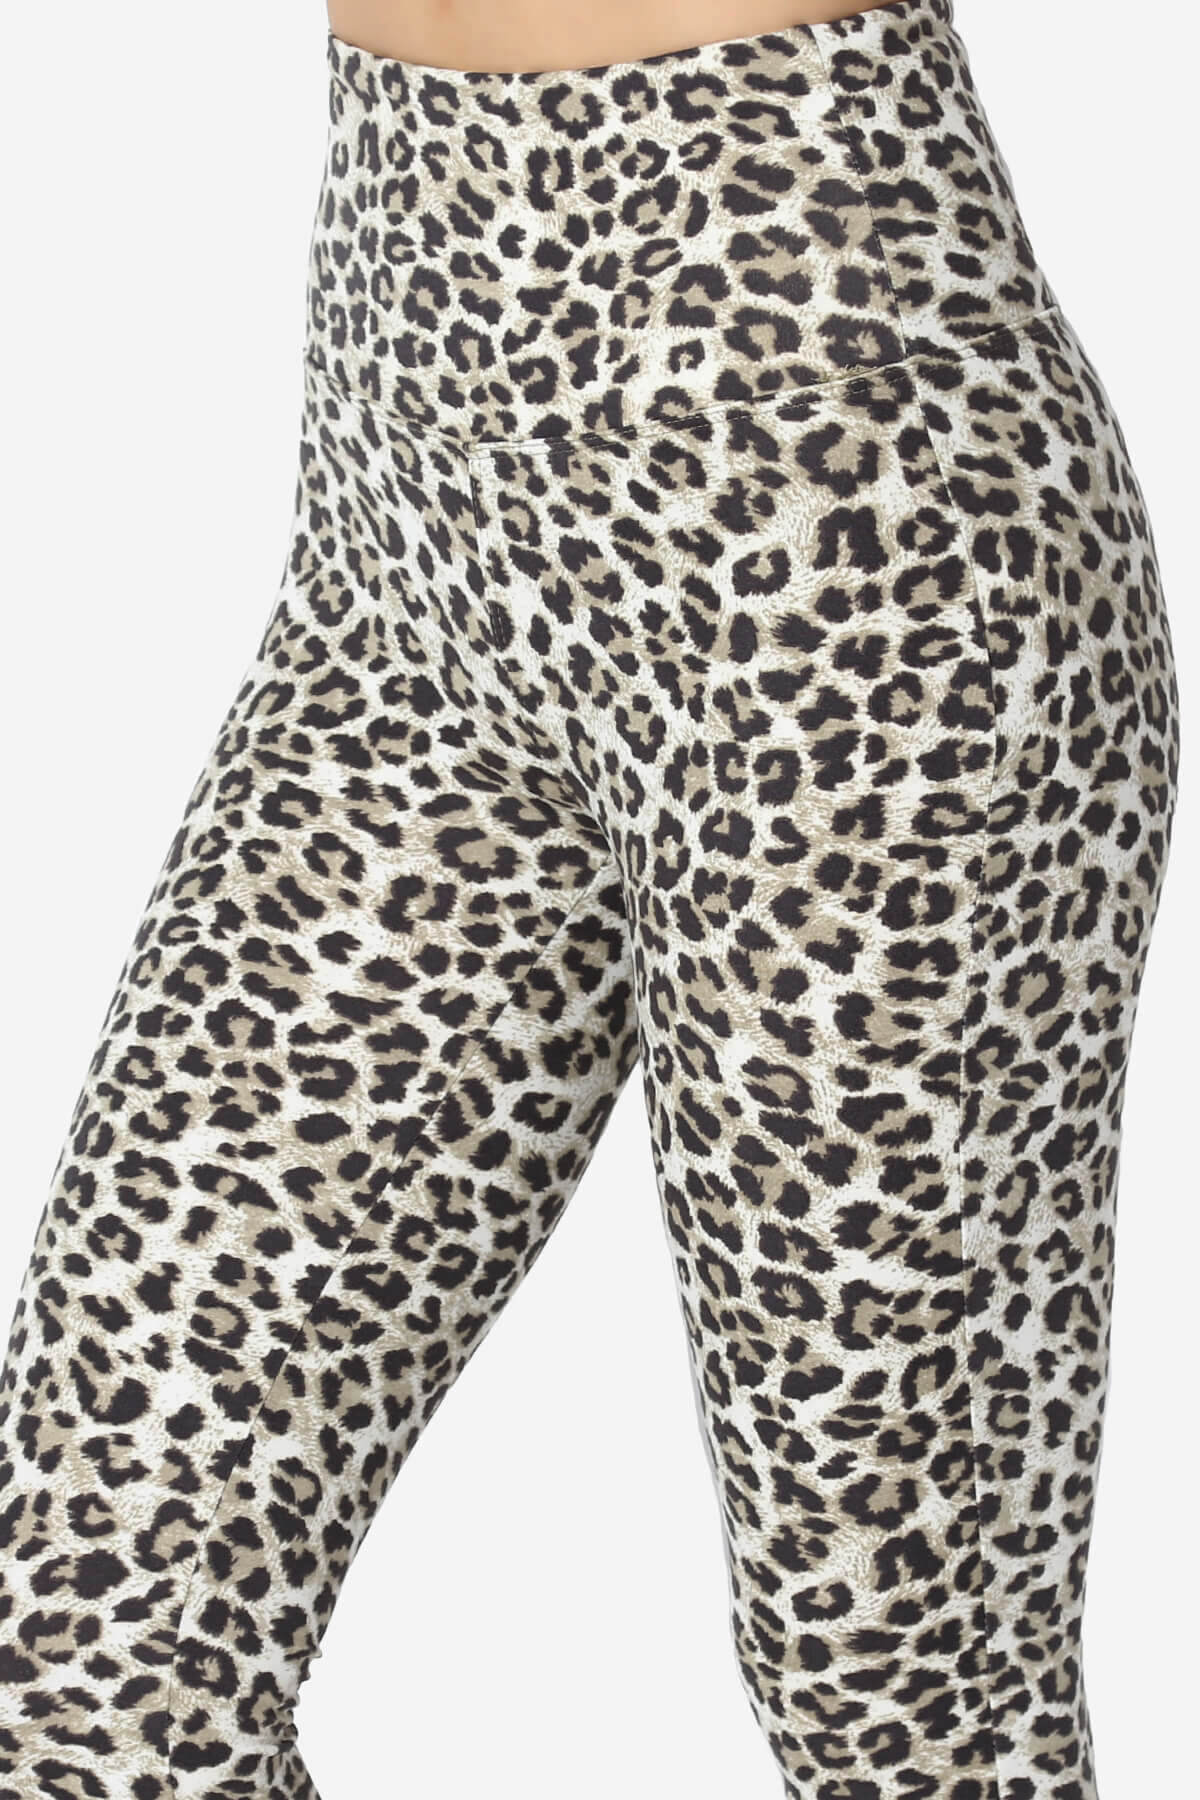 Load image into Gallery viewer, Lafayette Leopard High Waist Microfiber Leggings OLIVE_5
